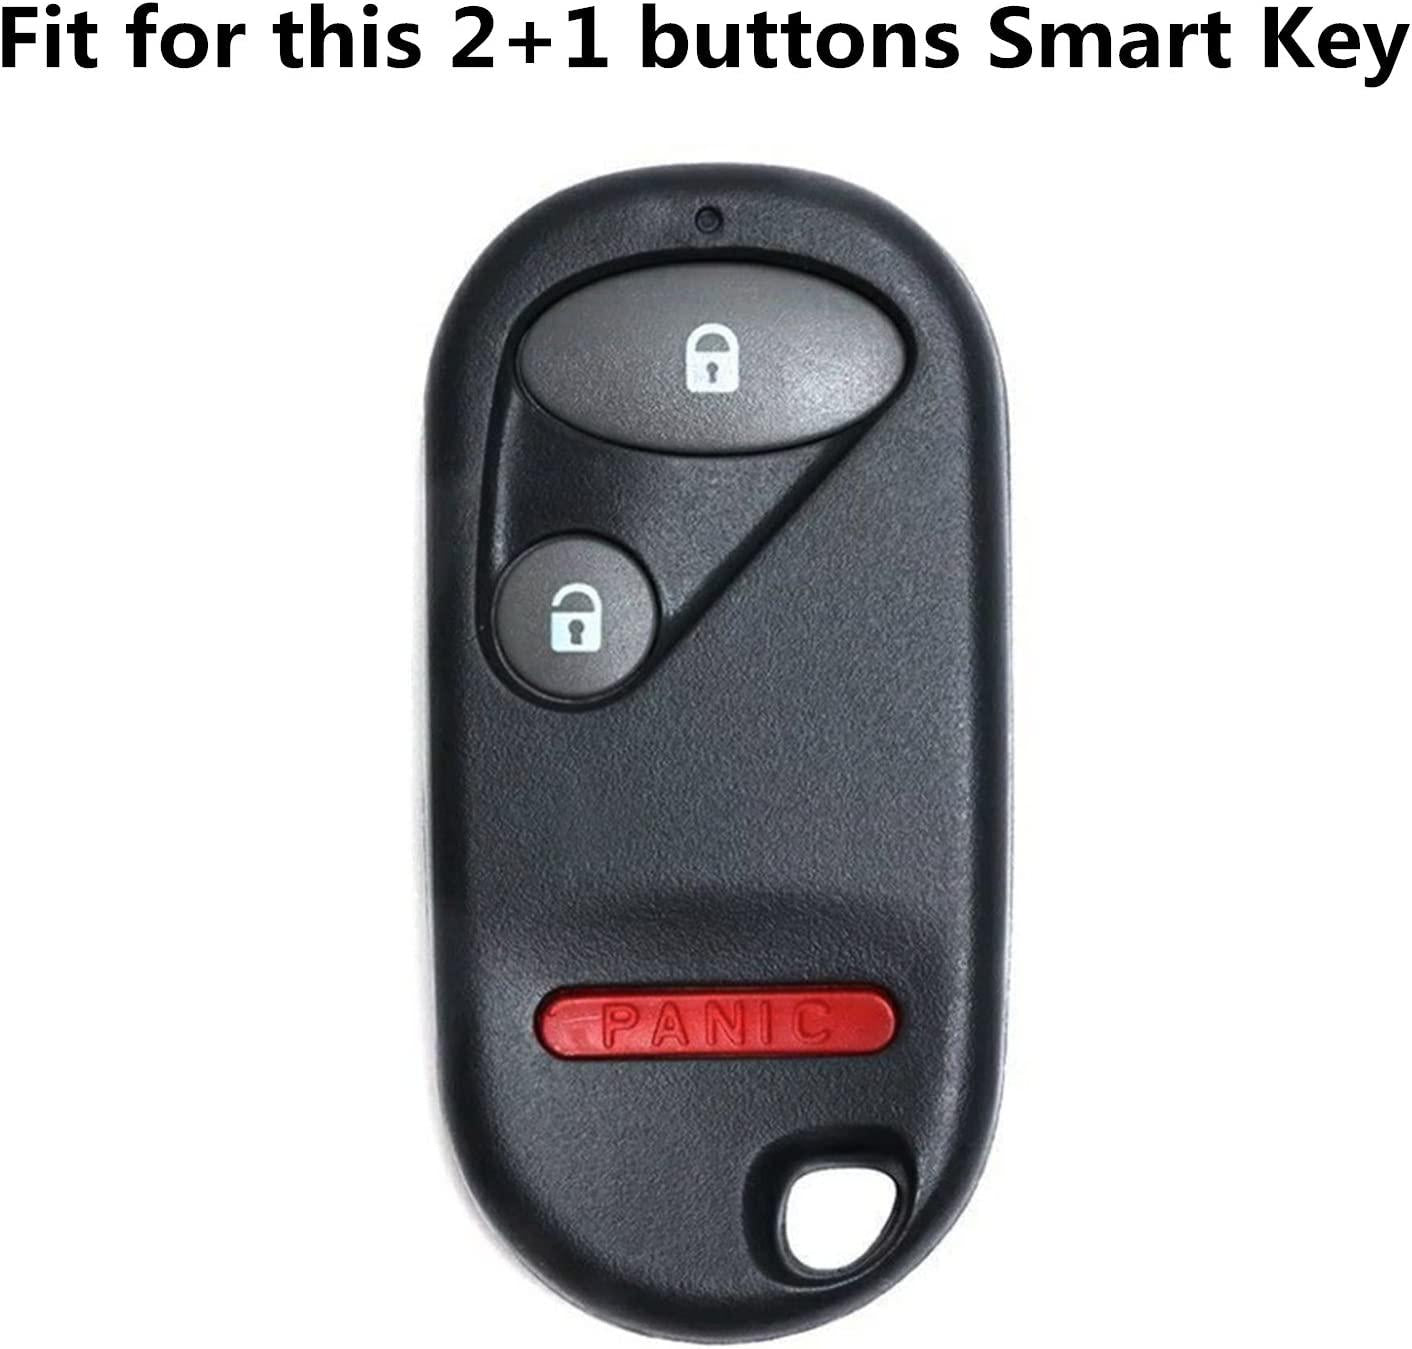 Ezzy Auto, Ezzy Auto Pack 2 Black Silicone Rubber Key Fob Case Key Covers Key Jacket Skin Protectors fit for Honda Civic Pilot Accord Element Insight